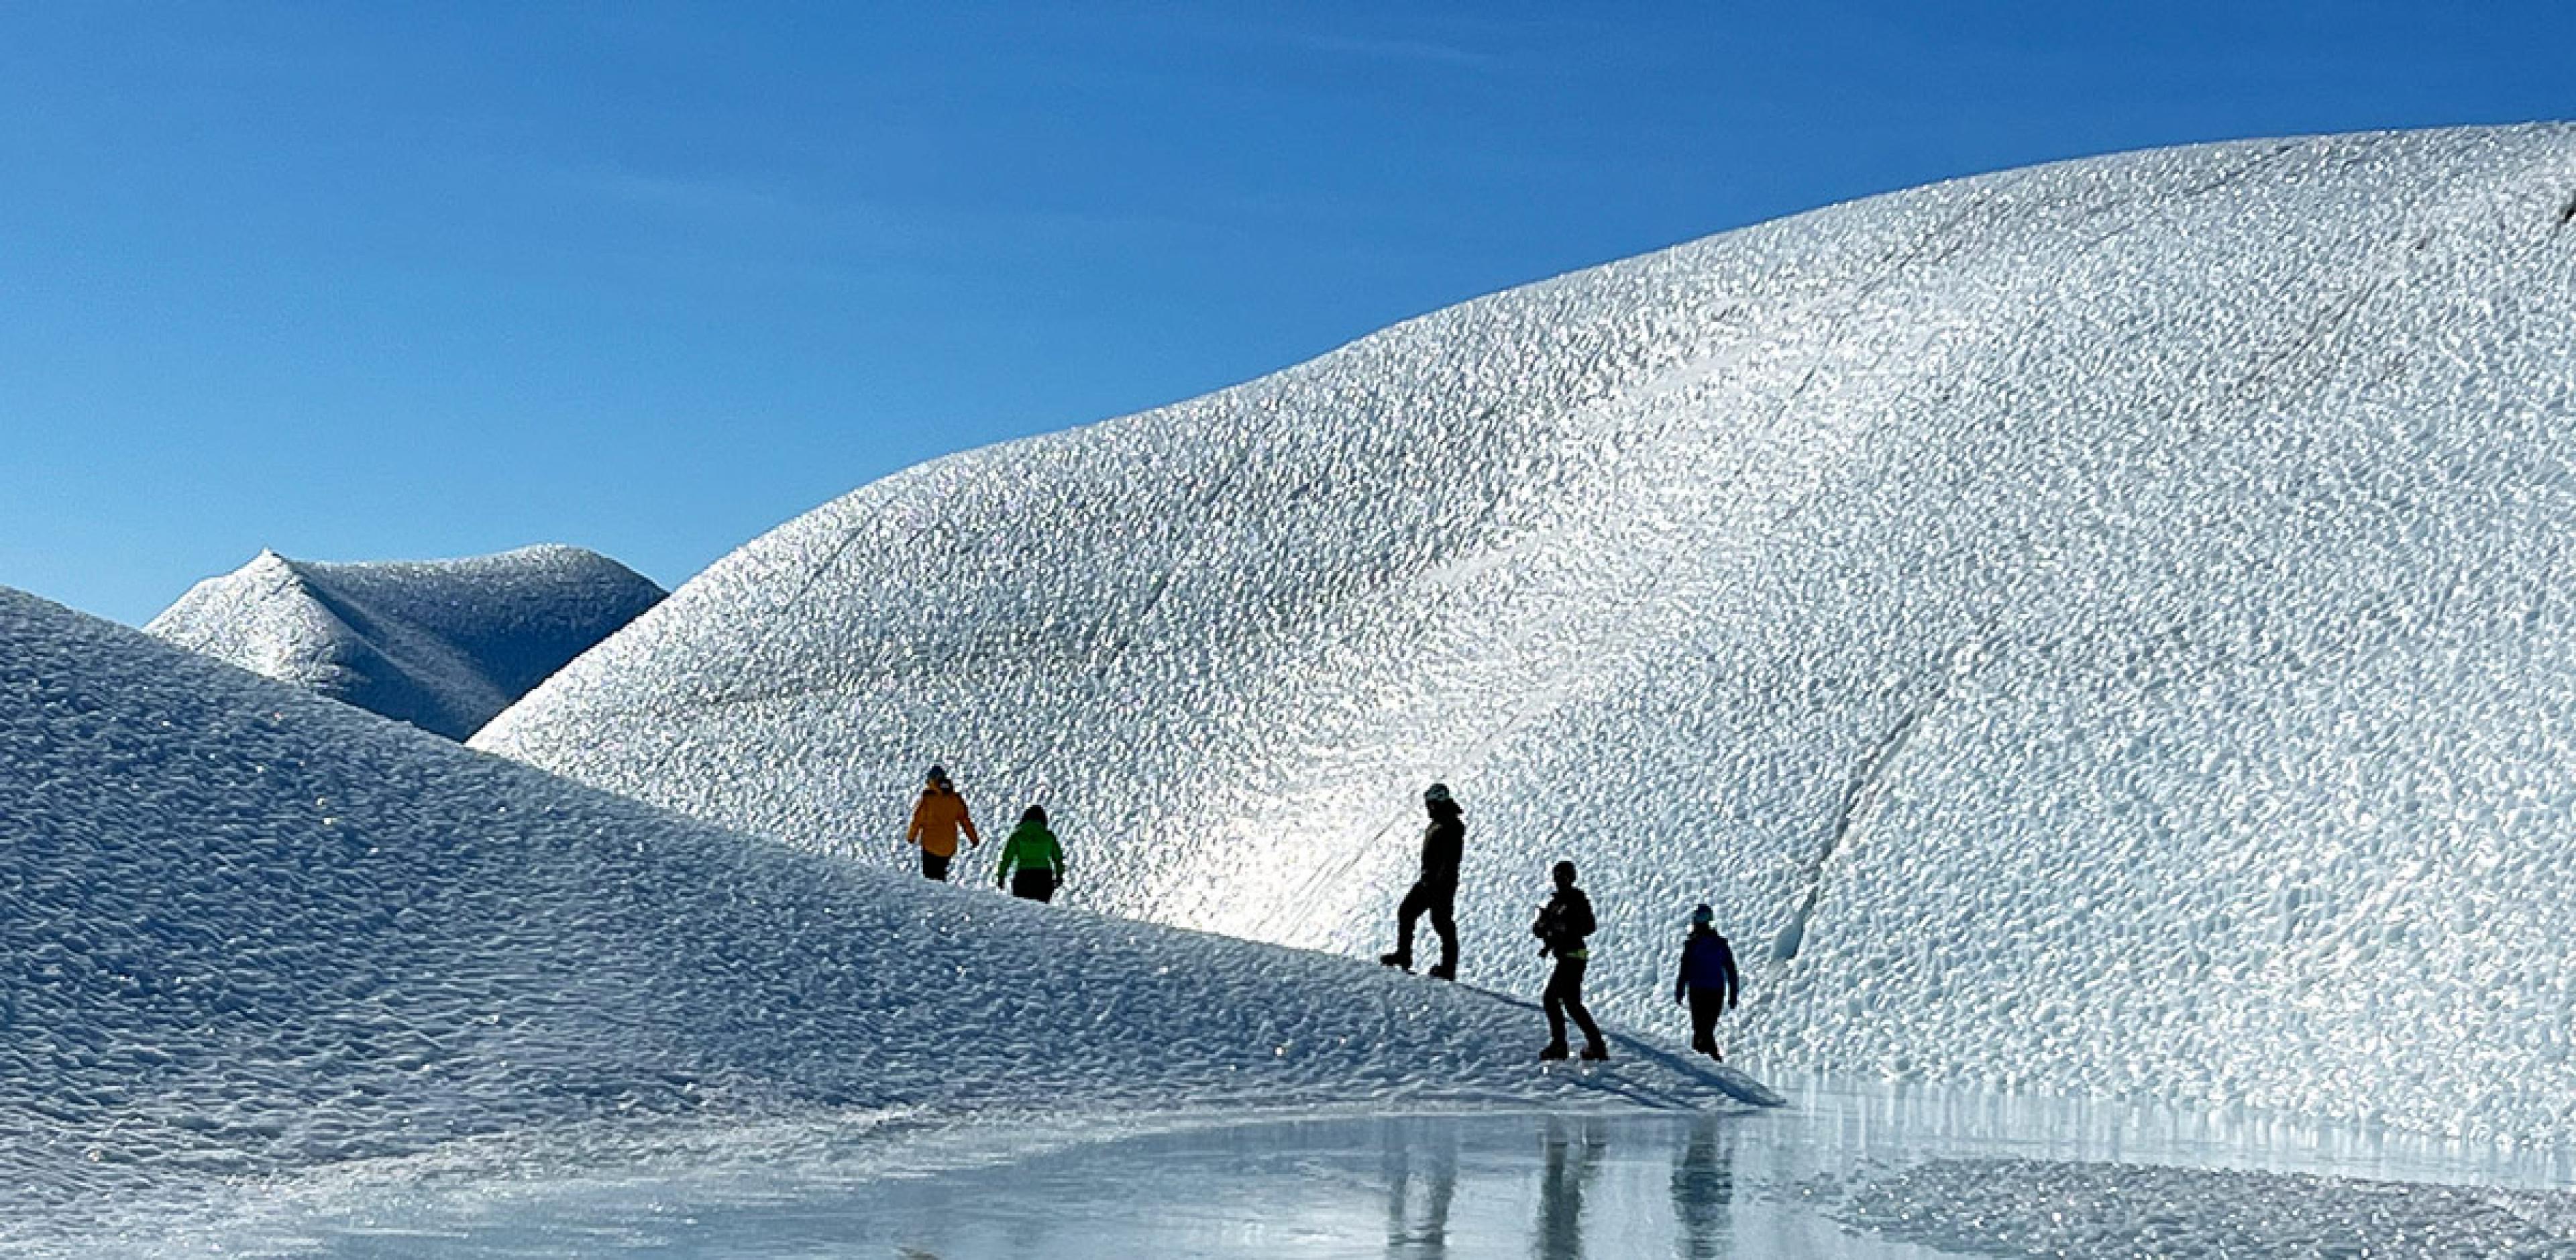 people climbing ice hill in antarctica